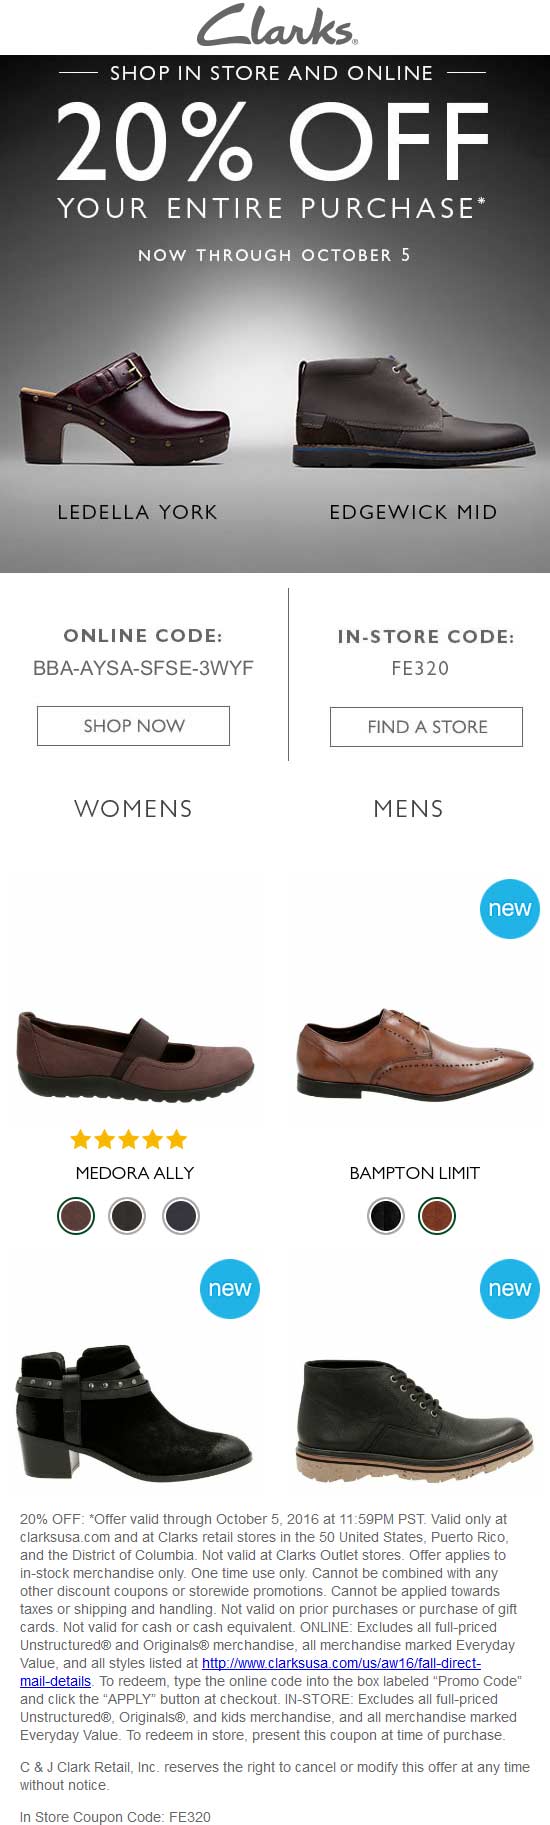 Clarks Coupon April 2024 20% off at Clarks shoes, or online via promo code BBA-AYSA-SFSE-3WYF